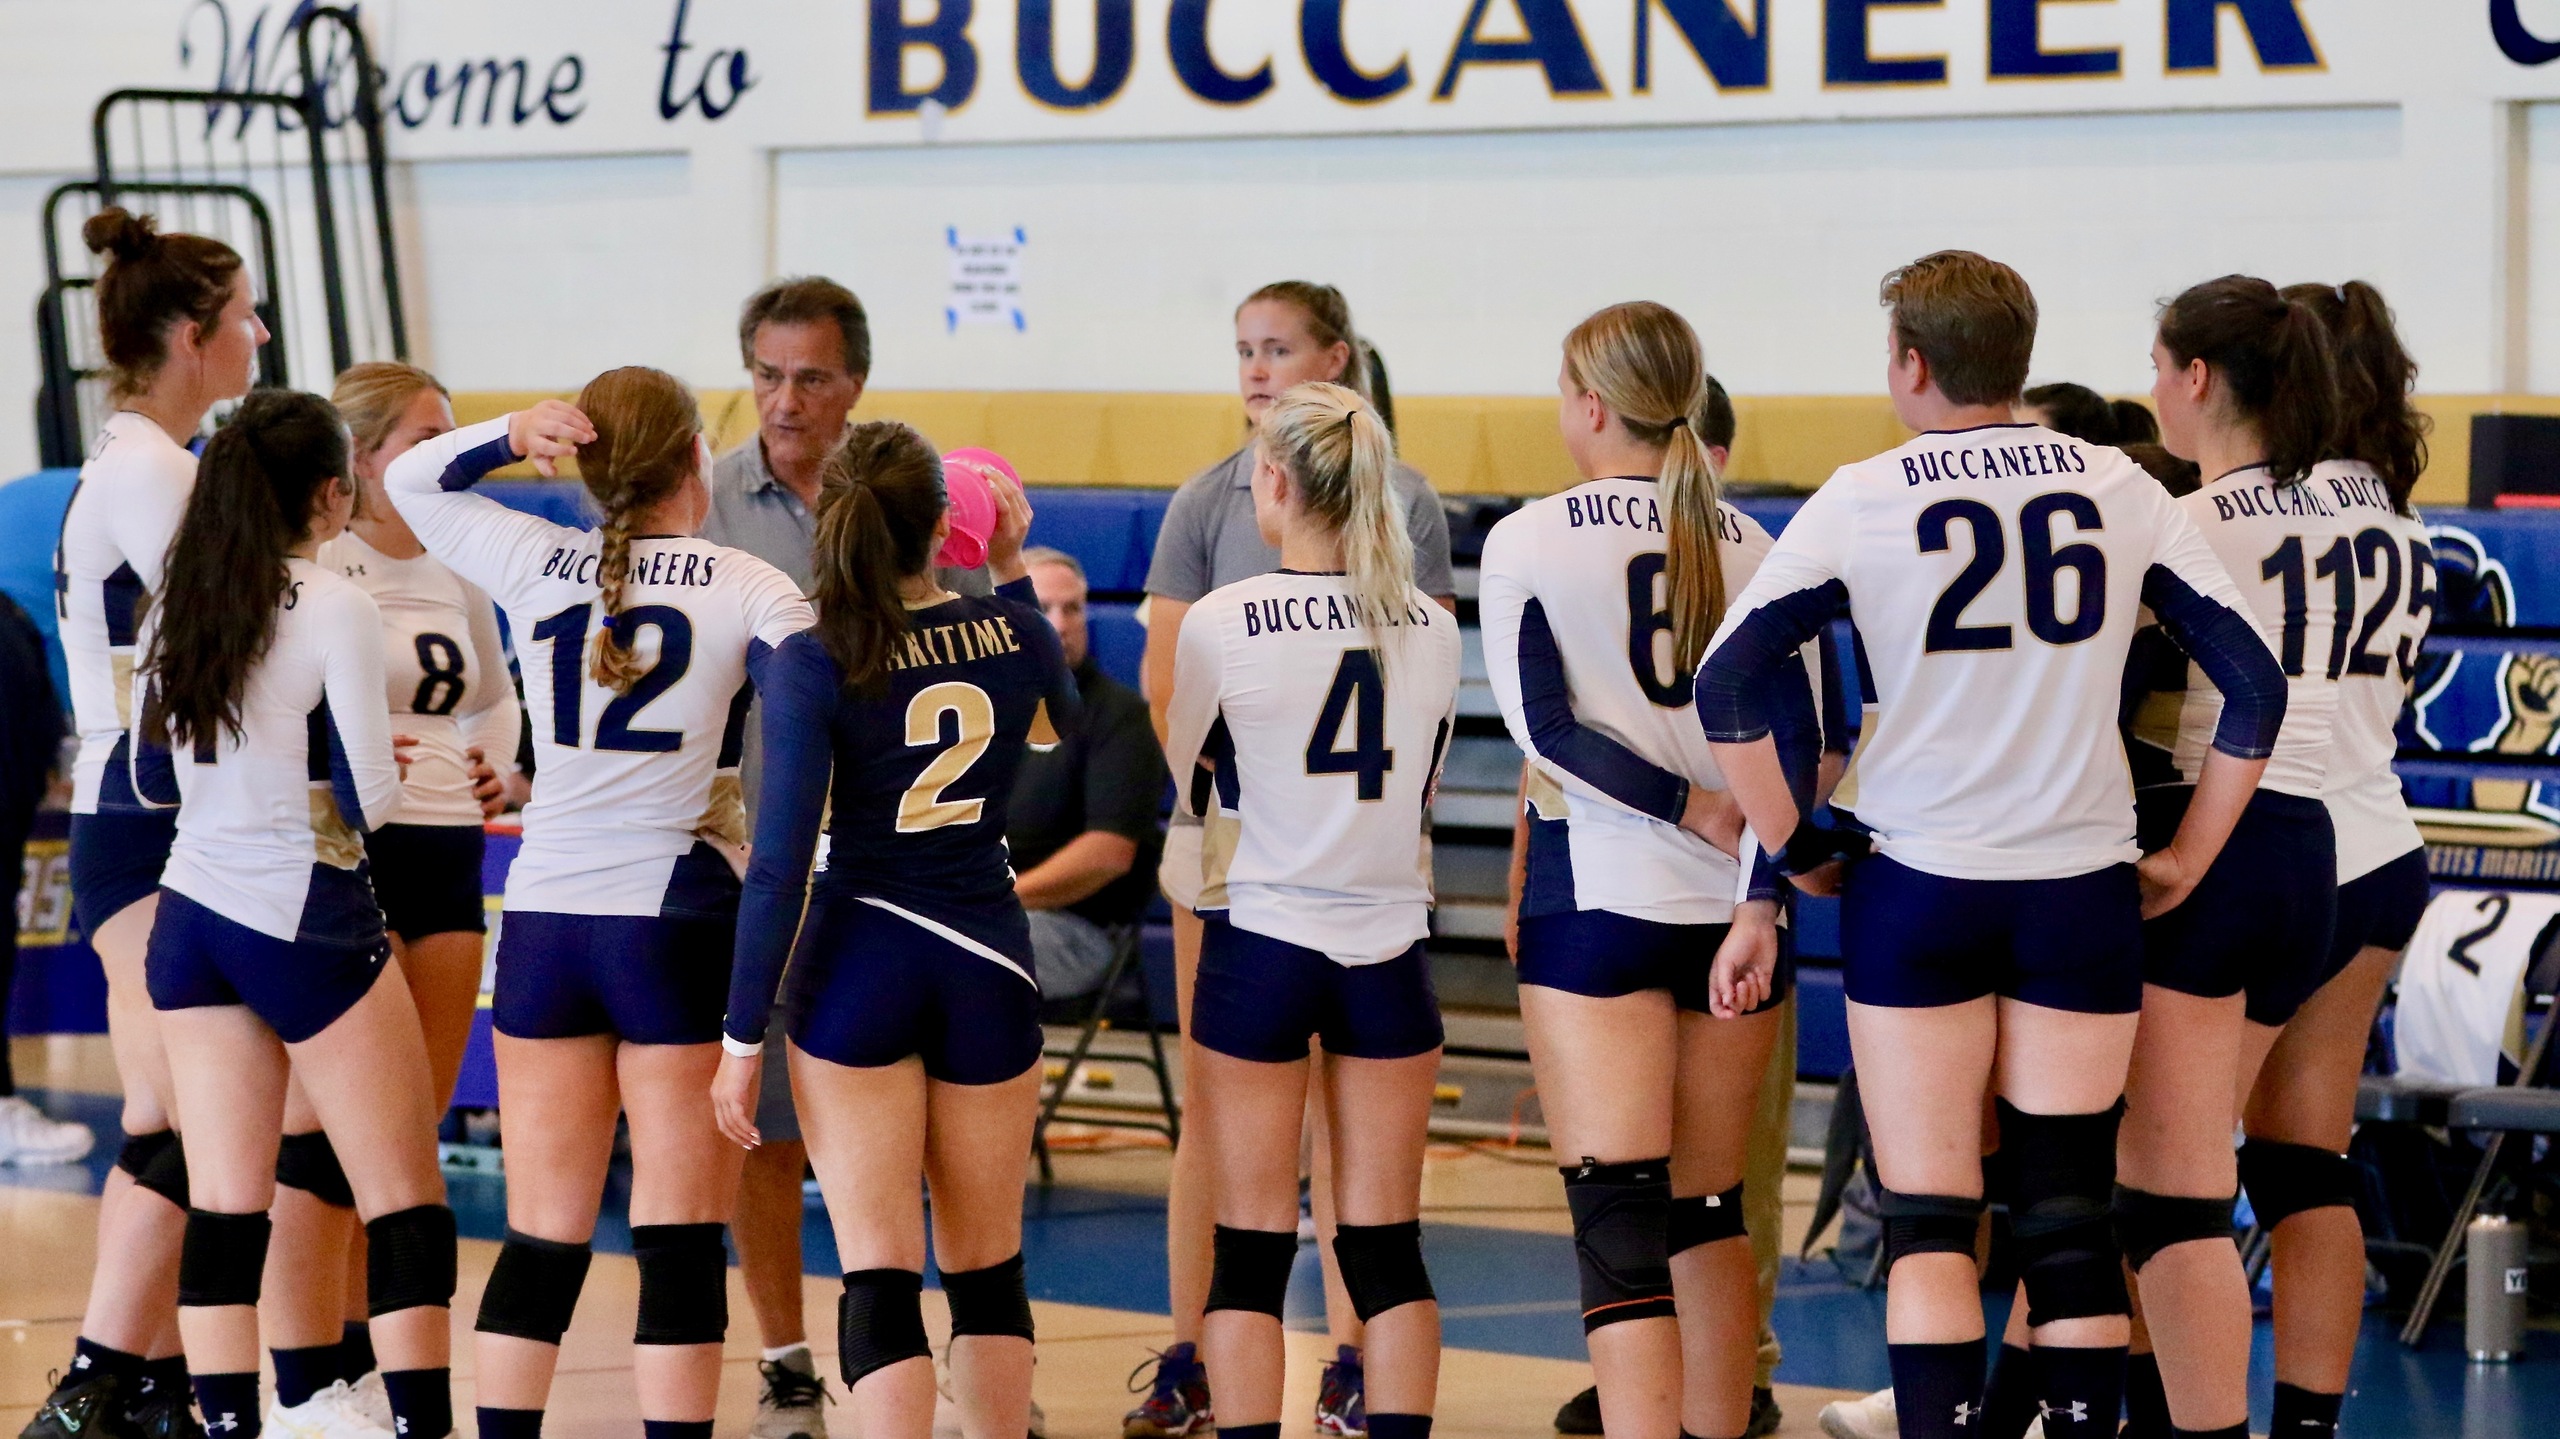 Volleyball: Maritime Loses Conference Match to MCLA in Four Sets